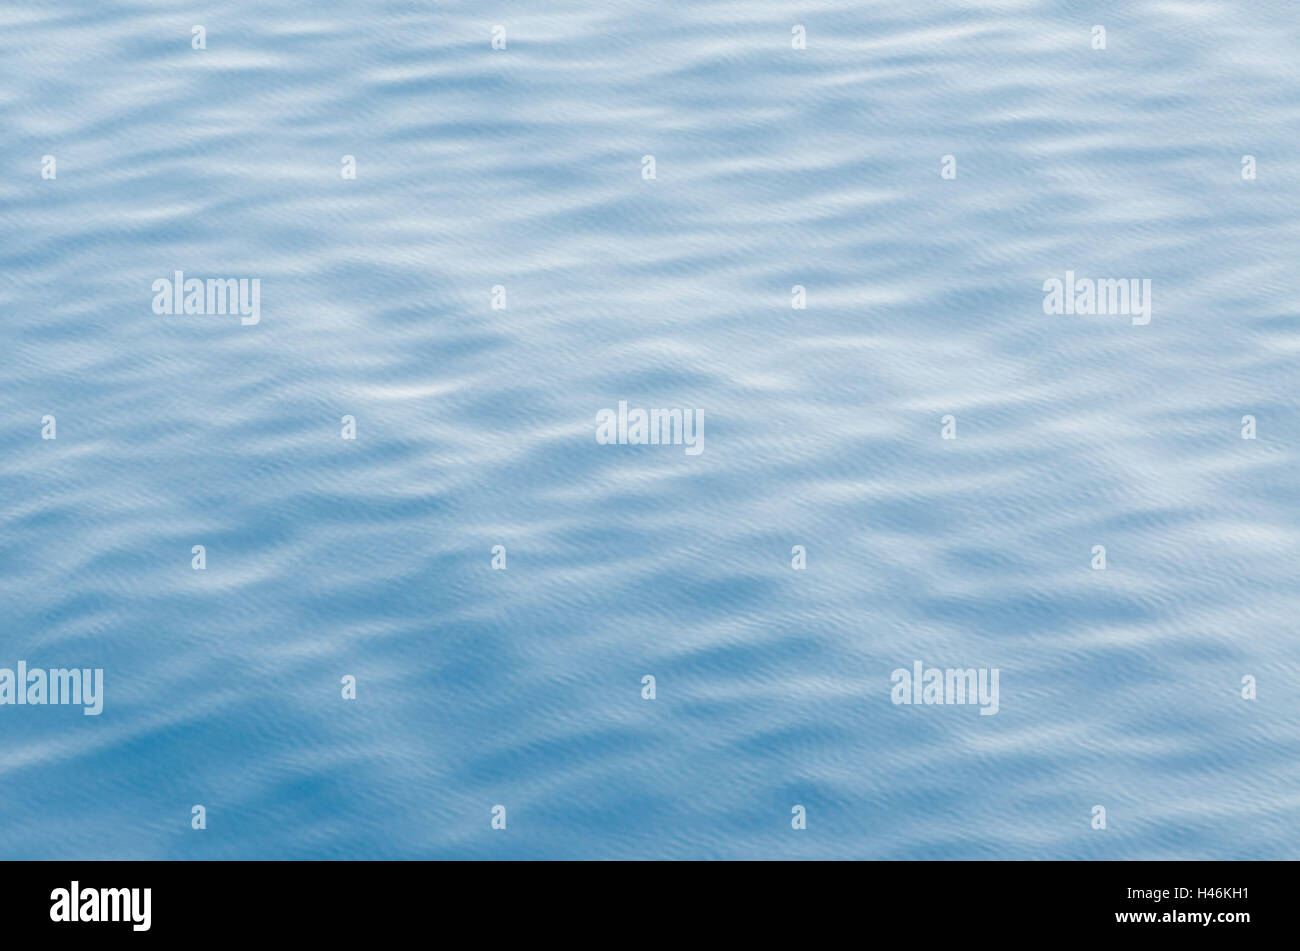 Sea, water surface, blue, waves, Stock Photo